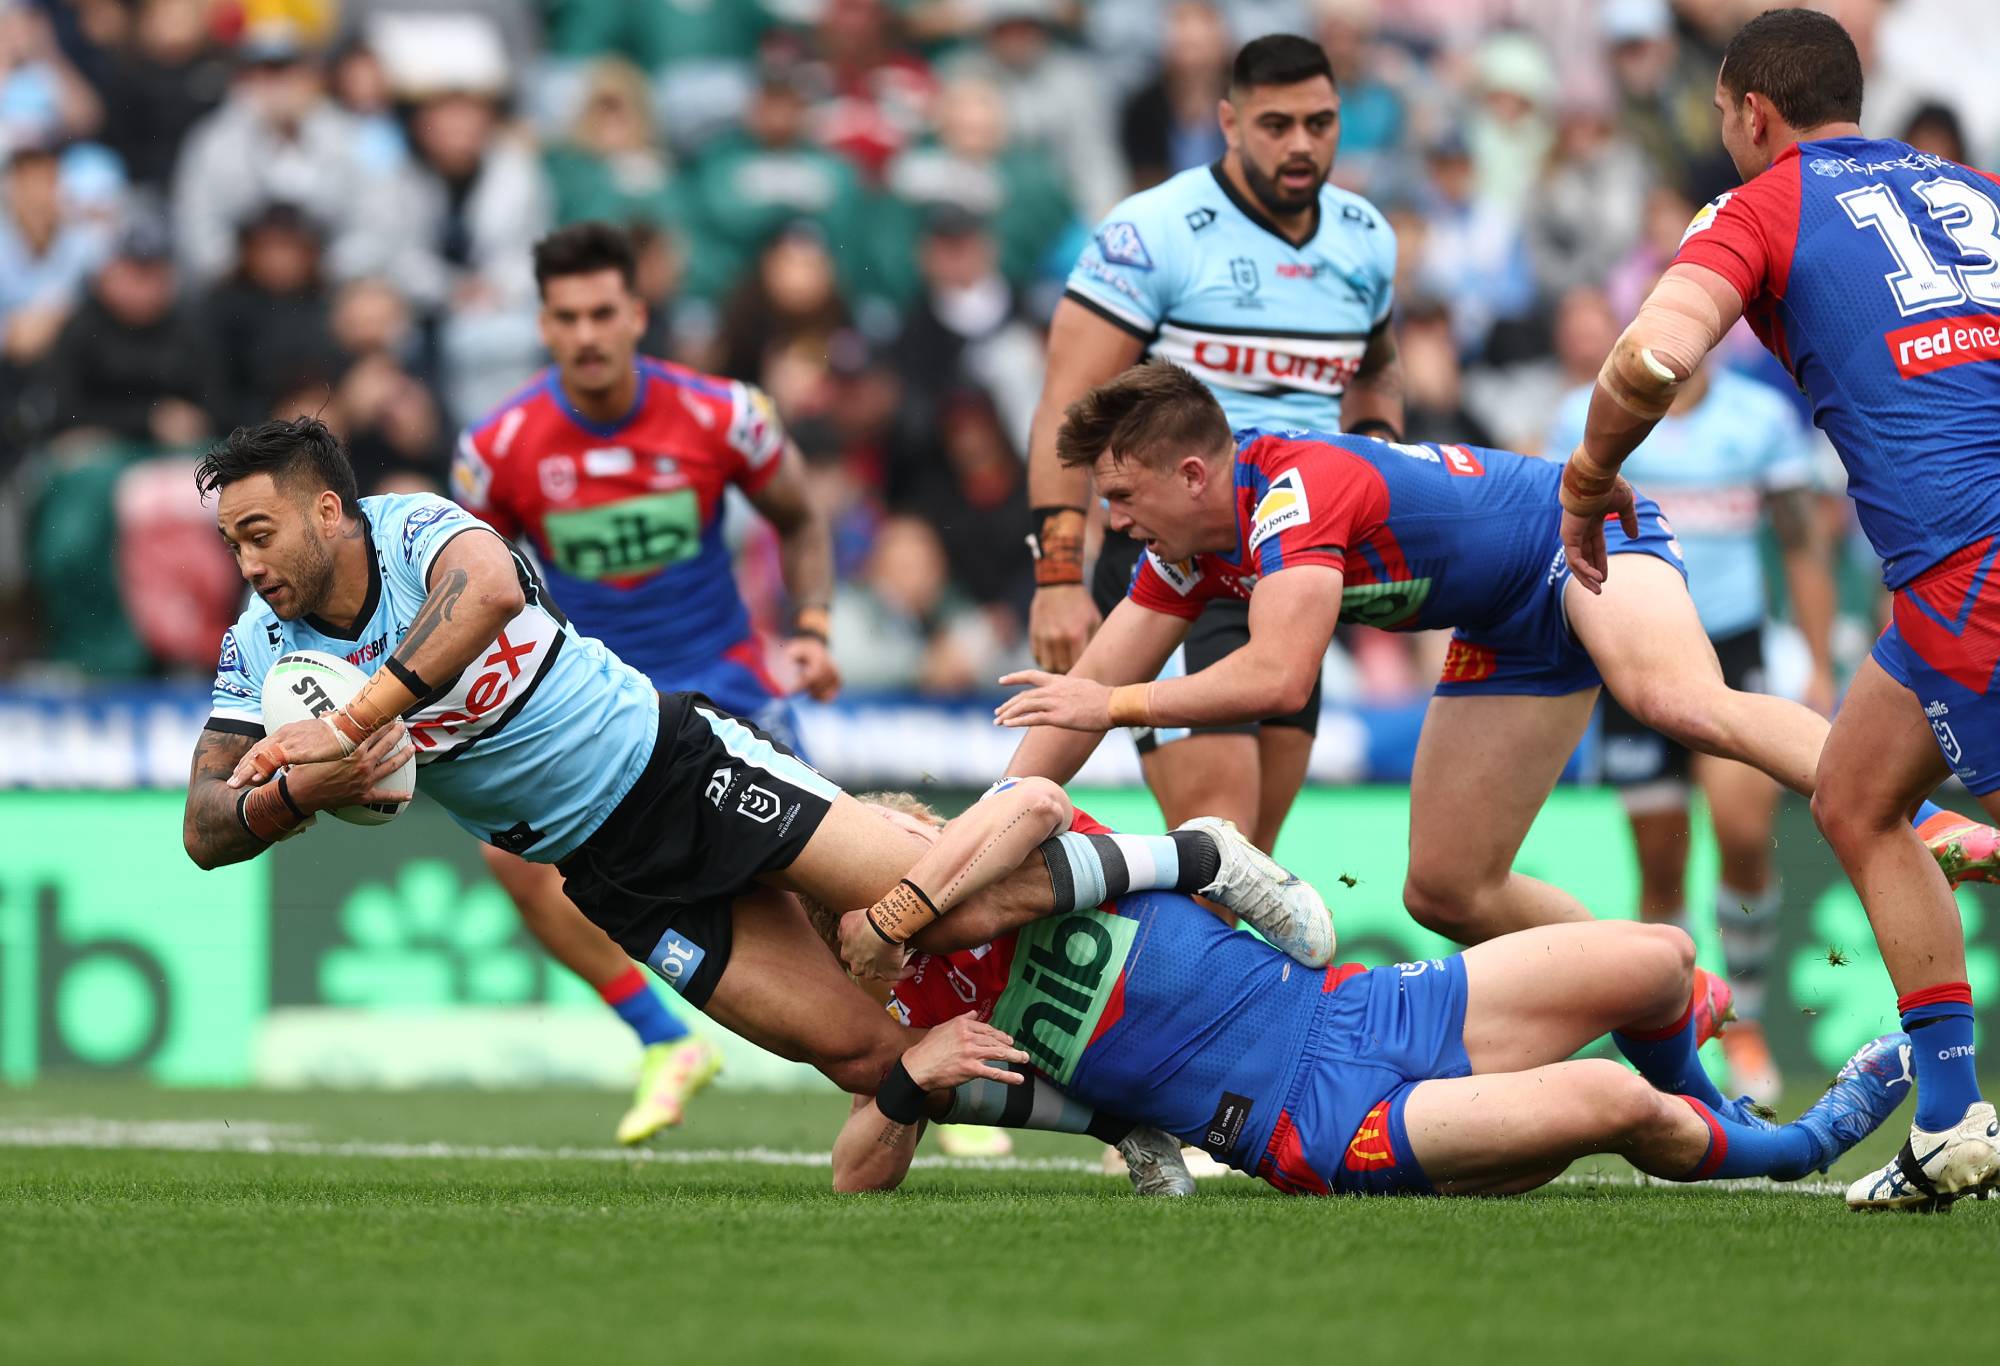 NEWCASTLE, AUSTRALIA - SEPTEMBER 04: Briton Nikora of the Sharks is tackled during the round 25 NRL match between the Newcastle Knights and the Cronulla Sharks at McDonald Jones Stadium, on September 04, 2022, in Newcastle, Australia. (Photo by Mark Metcalfe/Getty Images)